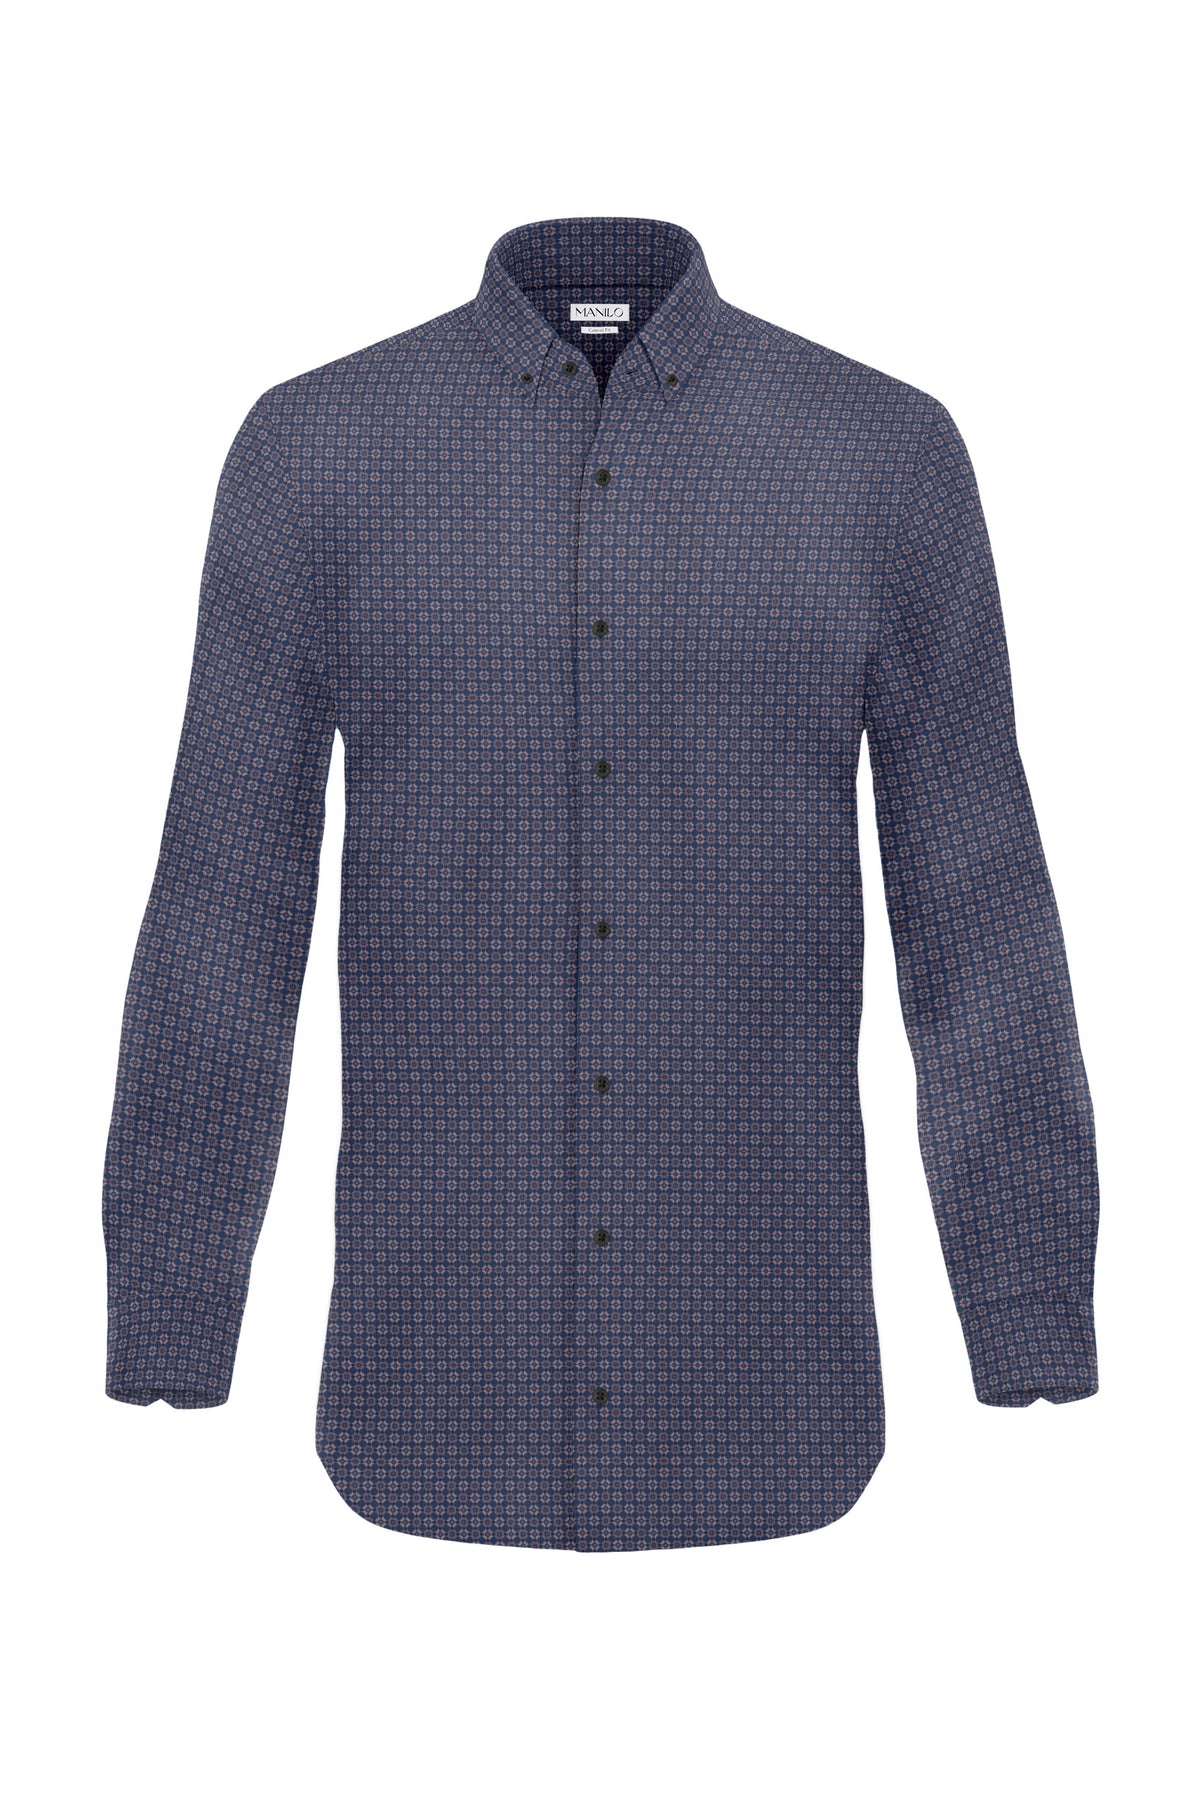 Printed casual shirt with graphic pattern in dark brown (Art. 2112-C)